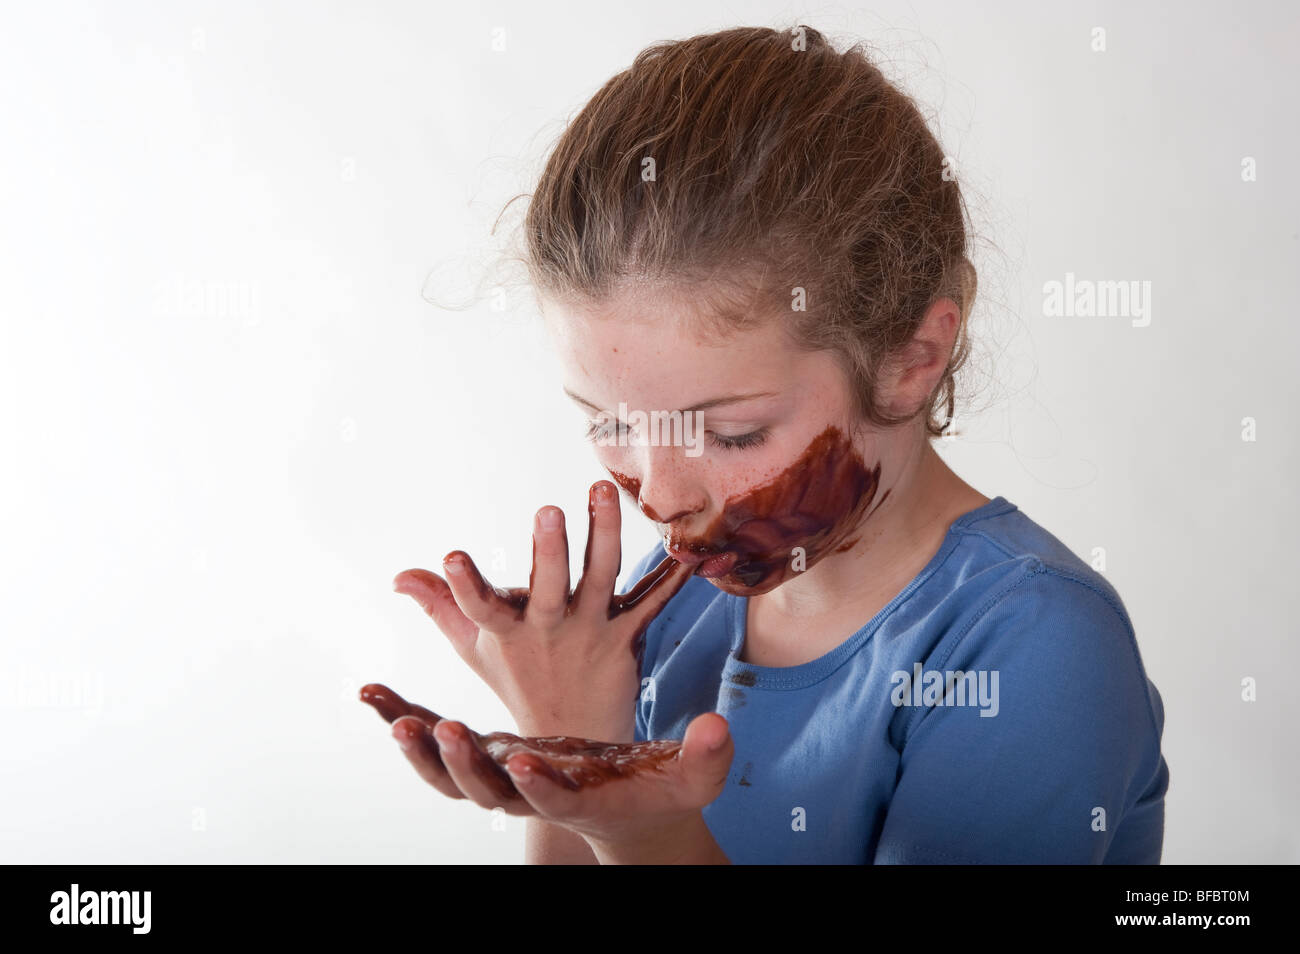 little girl with chocolate covered face licking her fingers Stock Photo